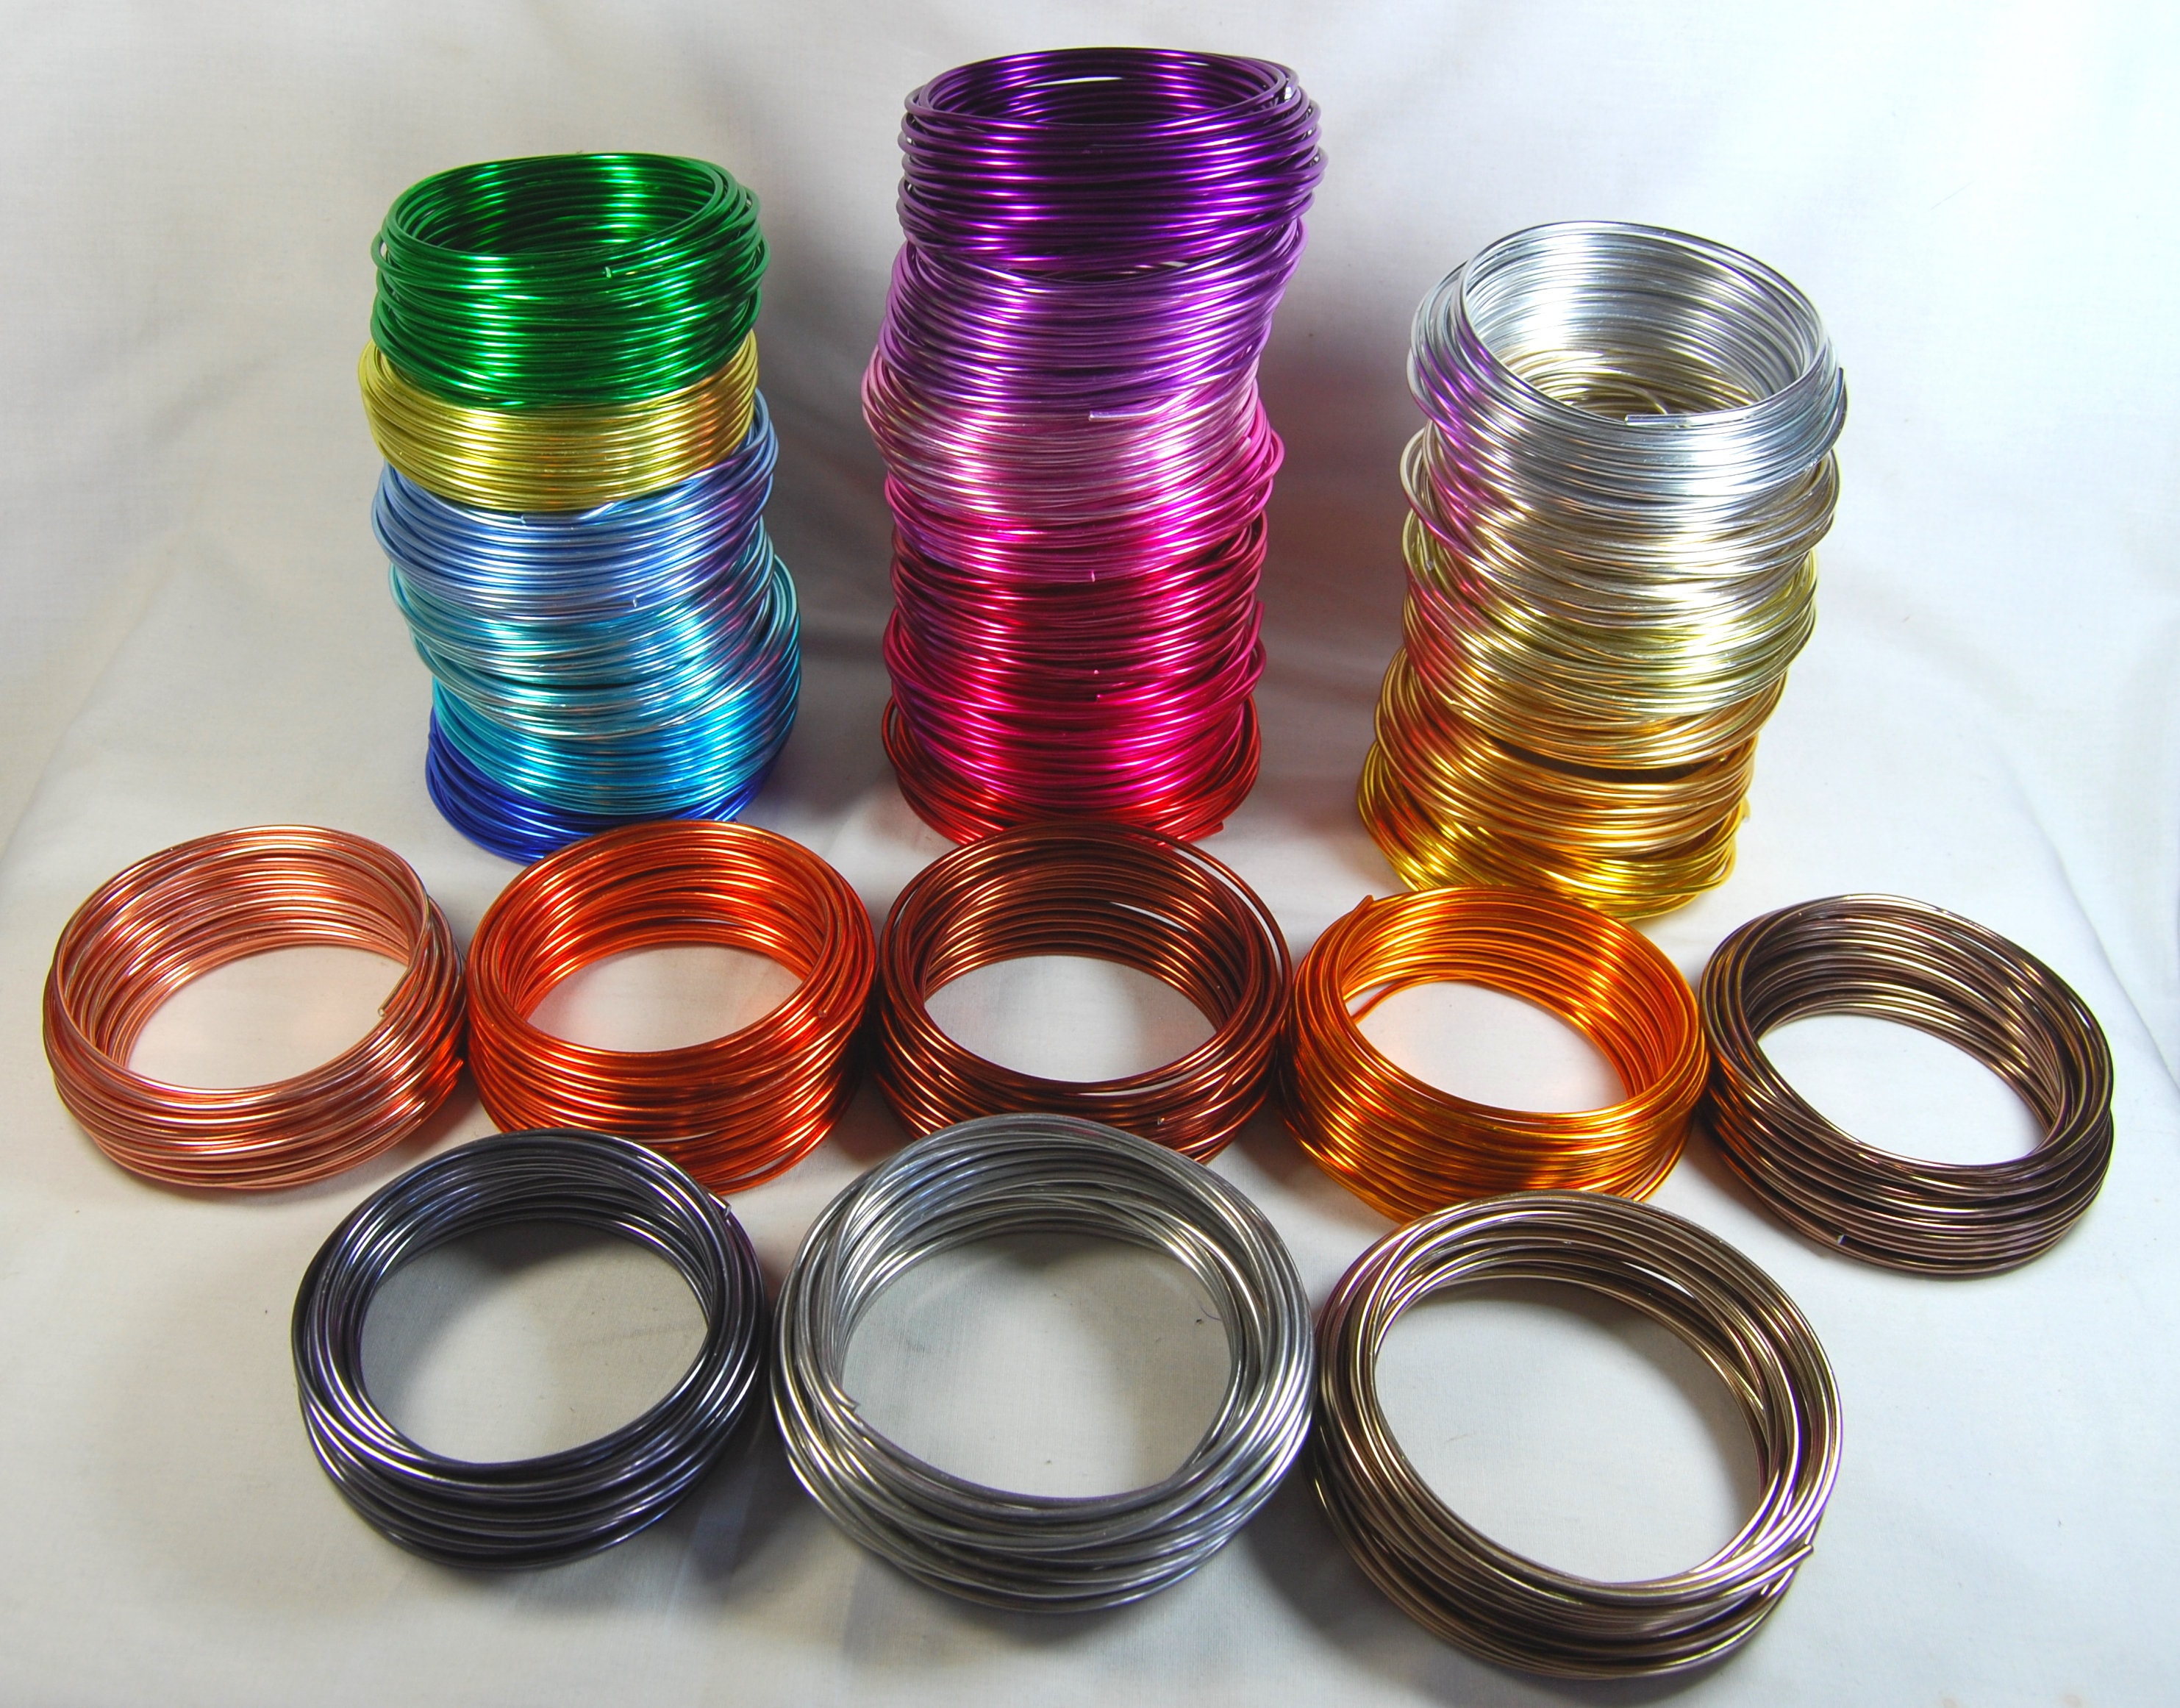 12x Aluminium Wire Bendable Metal Wire Cord Jewelry Making Wire